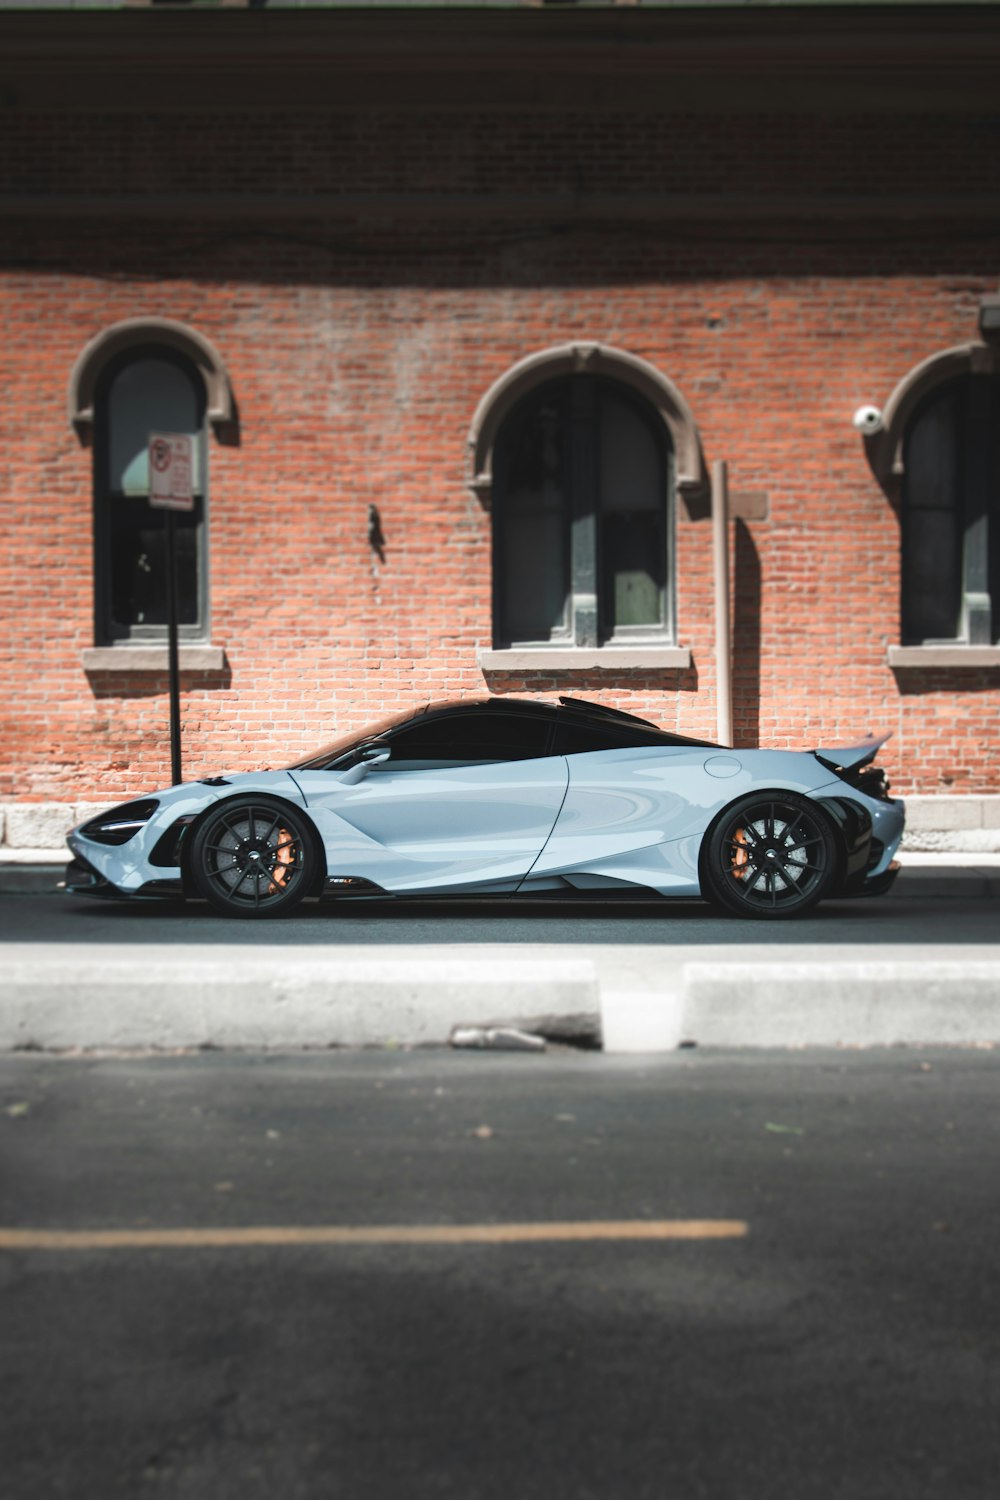 a blue sports car parked in front of a brick building